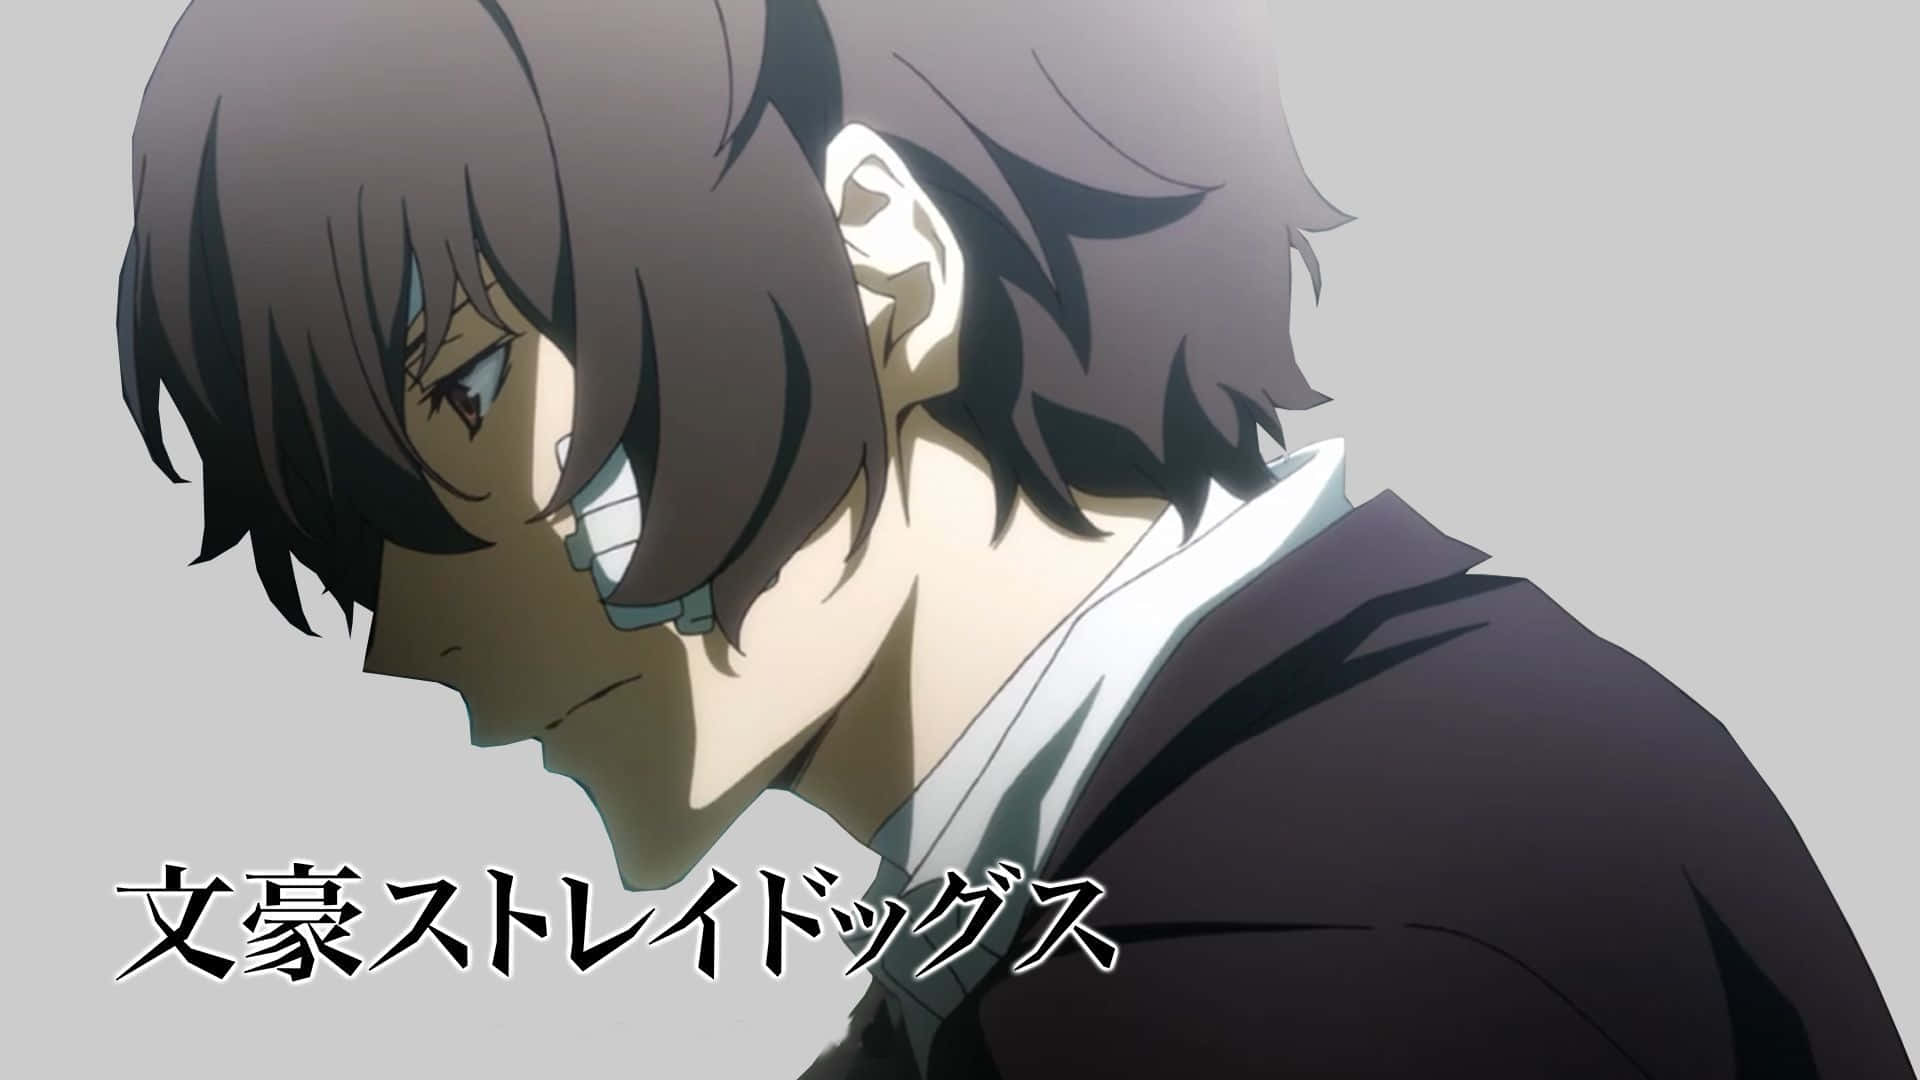 Captivating Side Profile of Dazai Osamu in Deep Thought Wallpaper